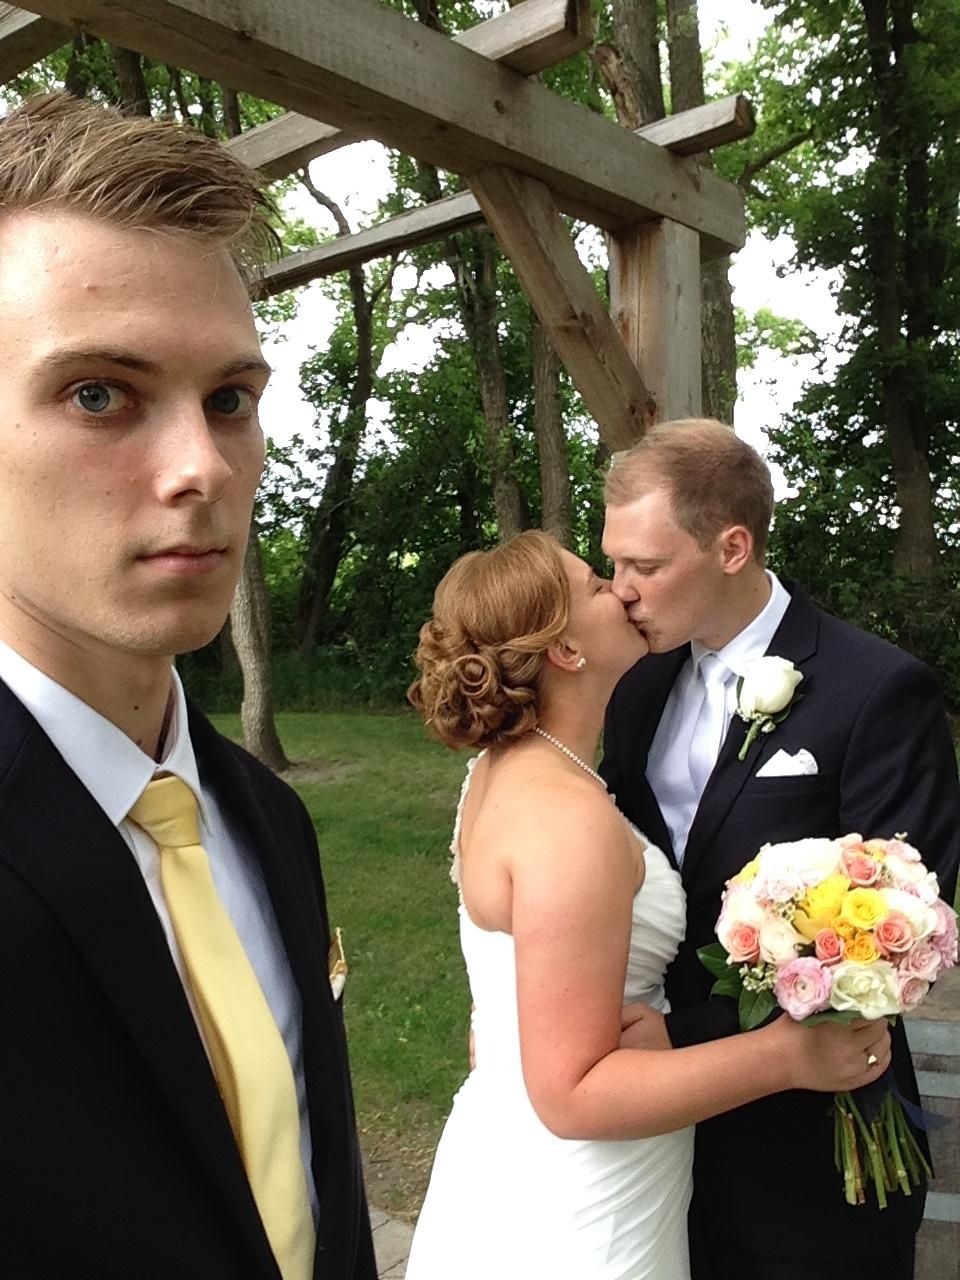 This photo album shows what life is like as a perpetual third wheel